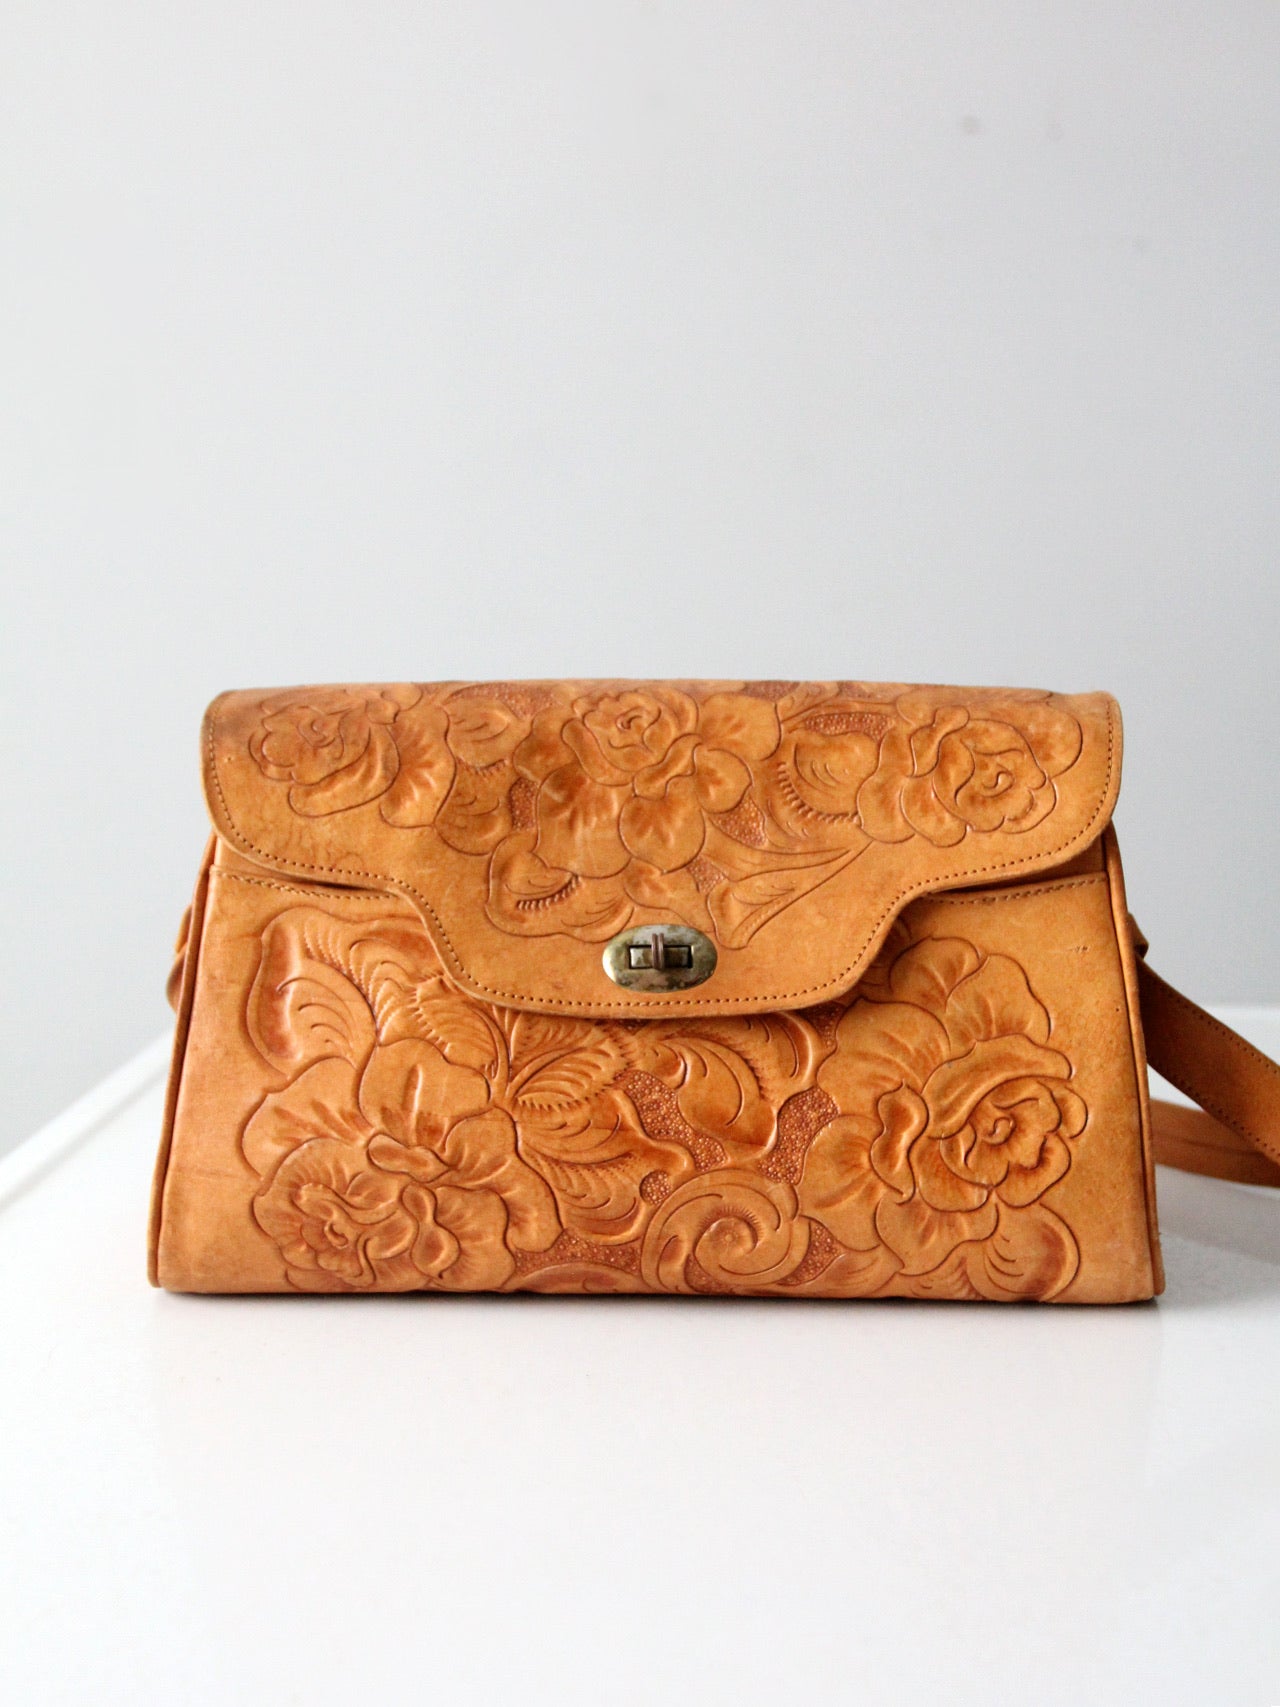 Vintage Tooled Leather Clutch Purse In good used... - Depop